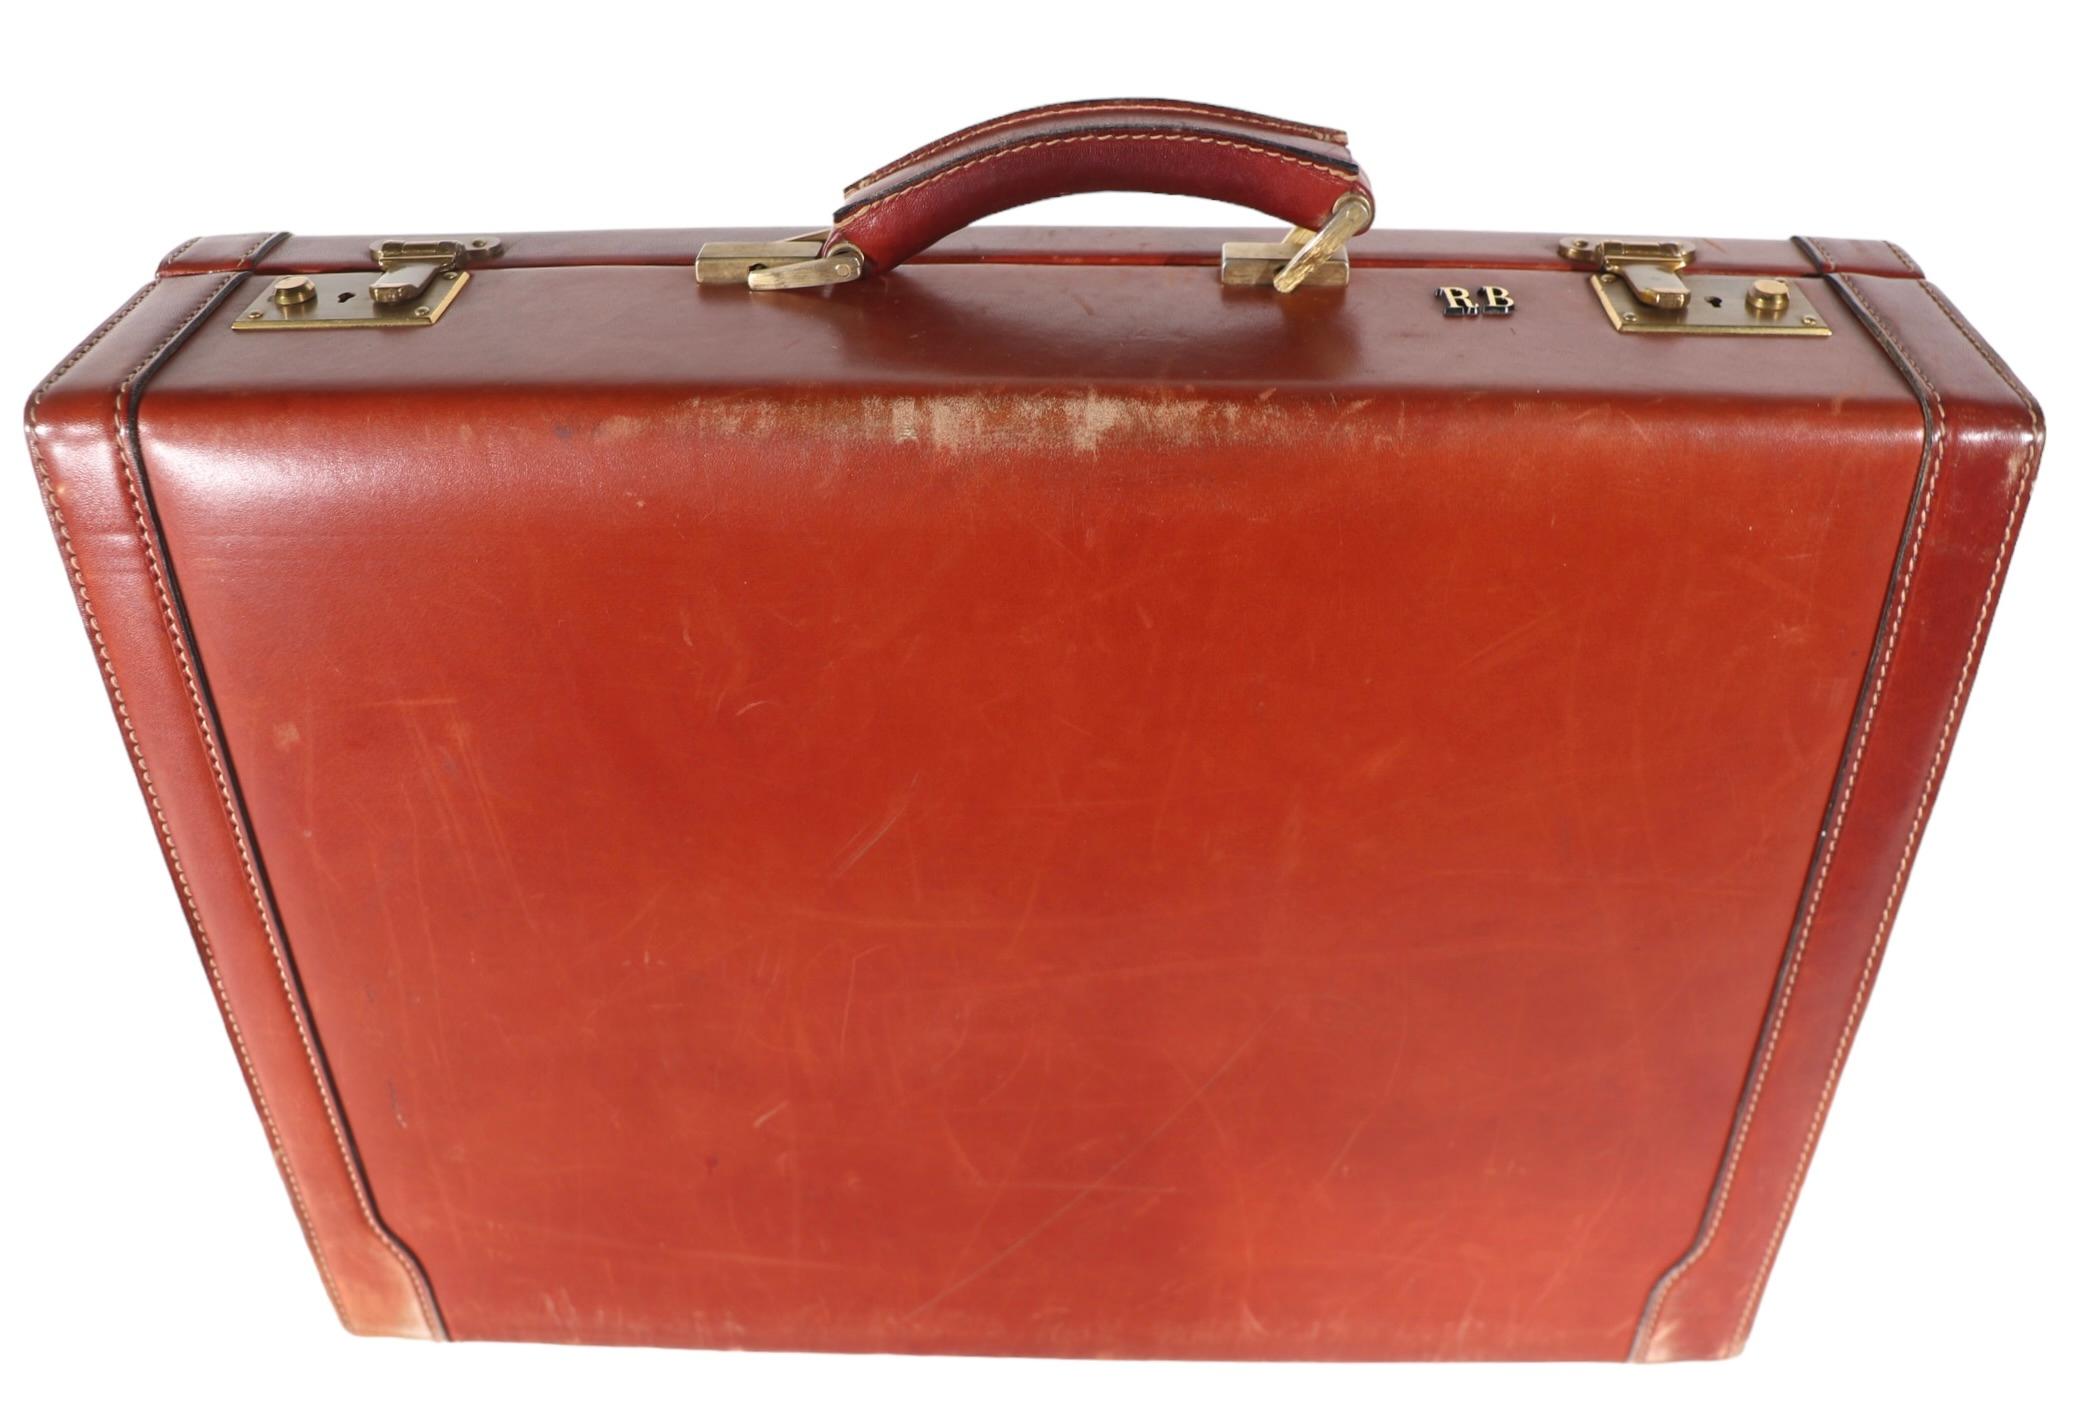  Mid Century Art Deco Hard Case Leather Attache Briefcase  after Bally, Hermes  For Sale 3